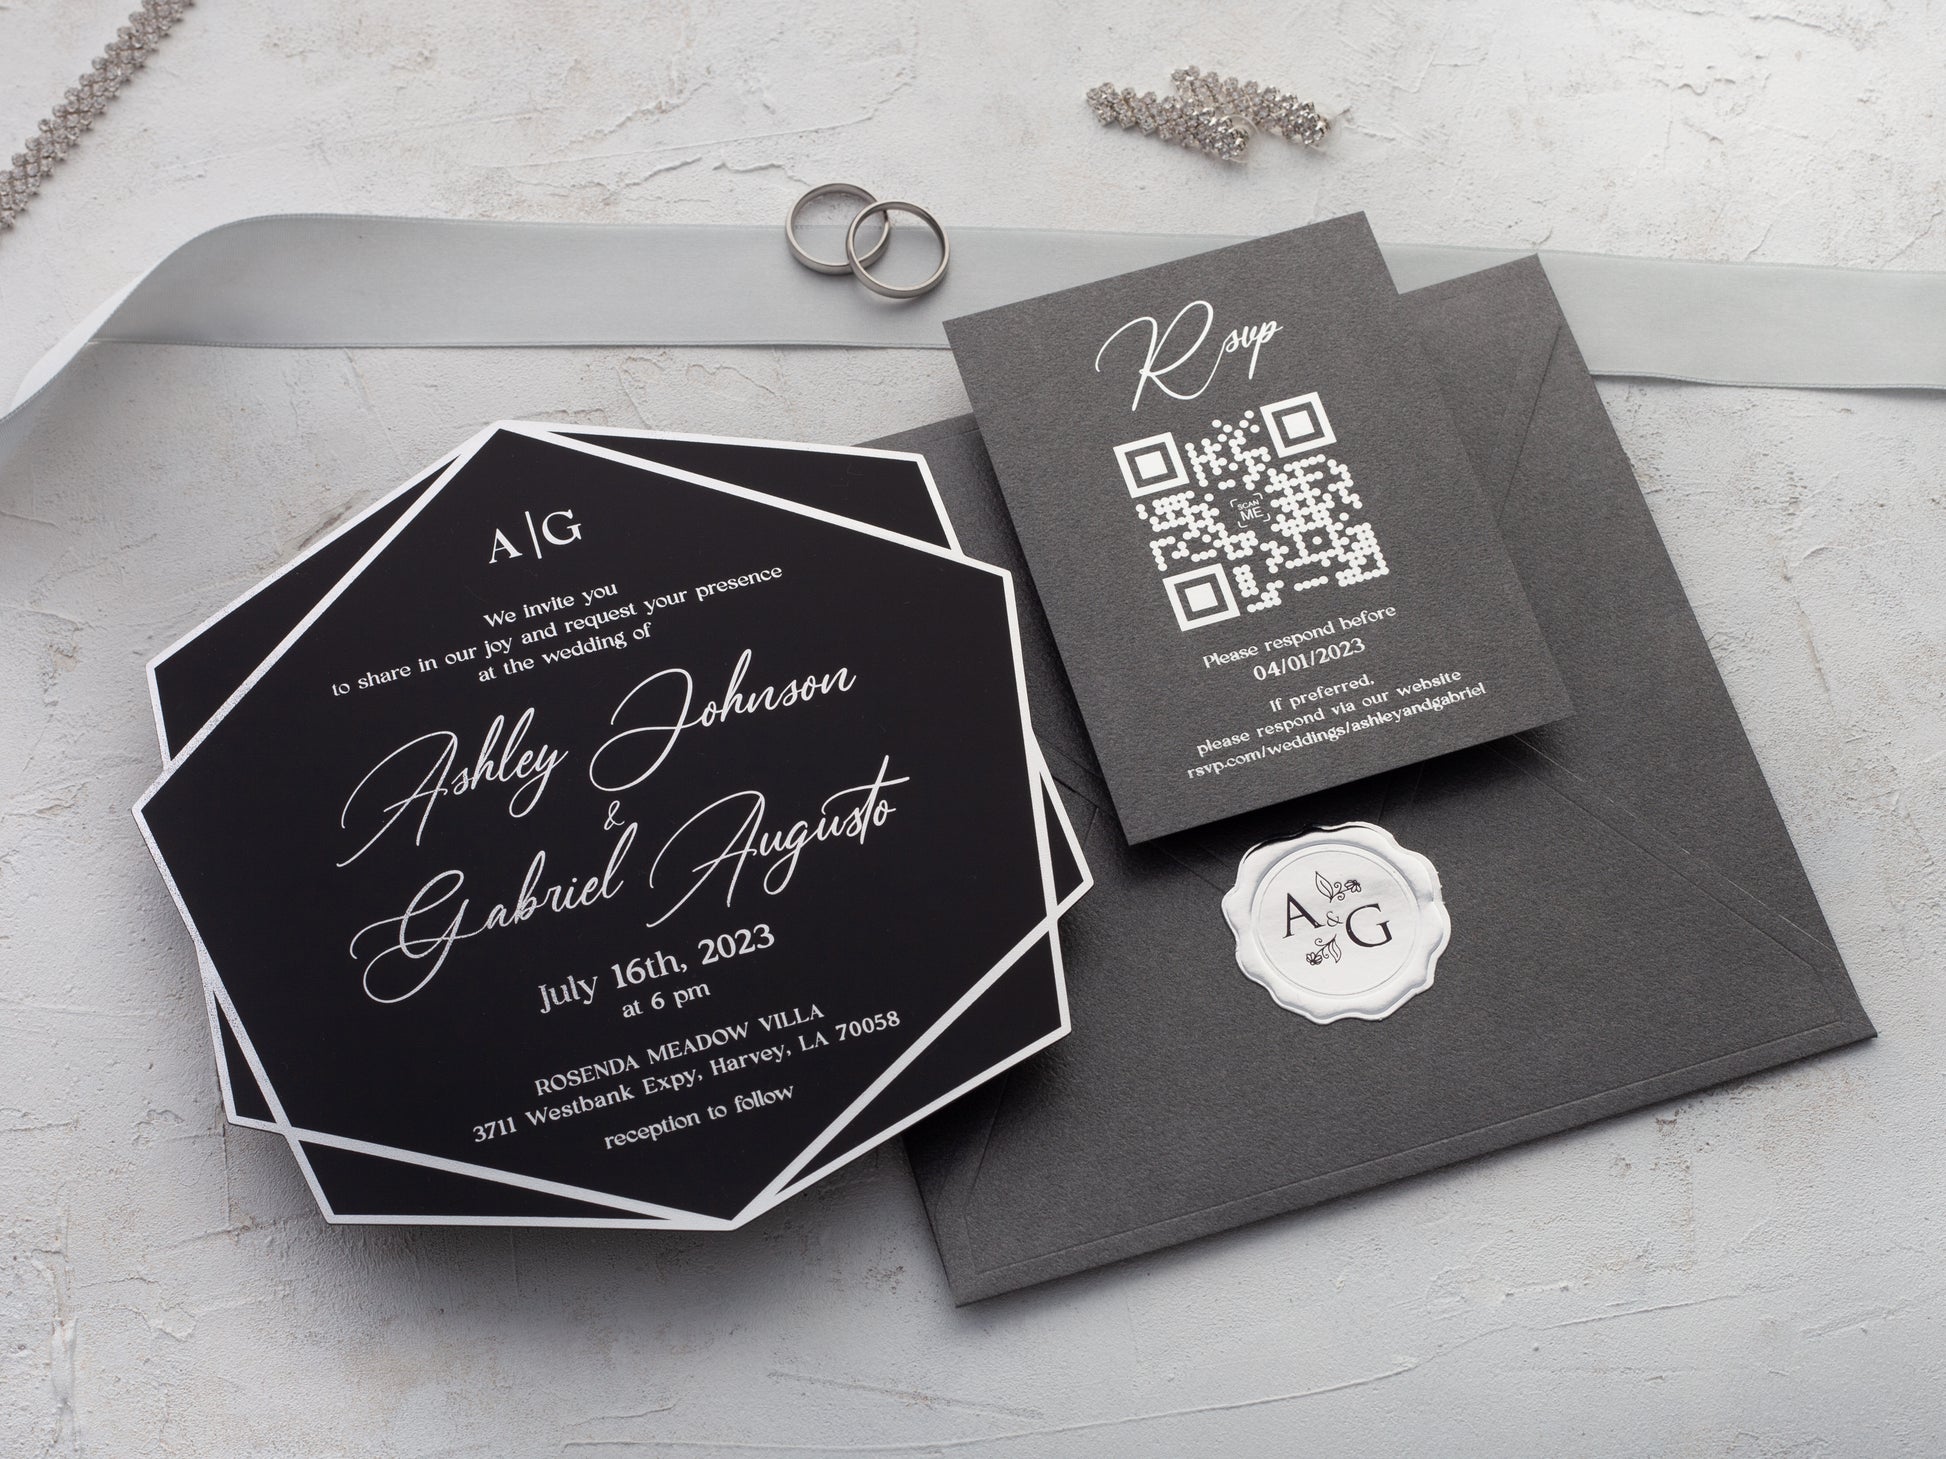 Black wedding invitation and rsvp card with QR code